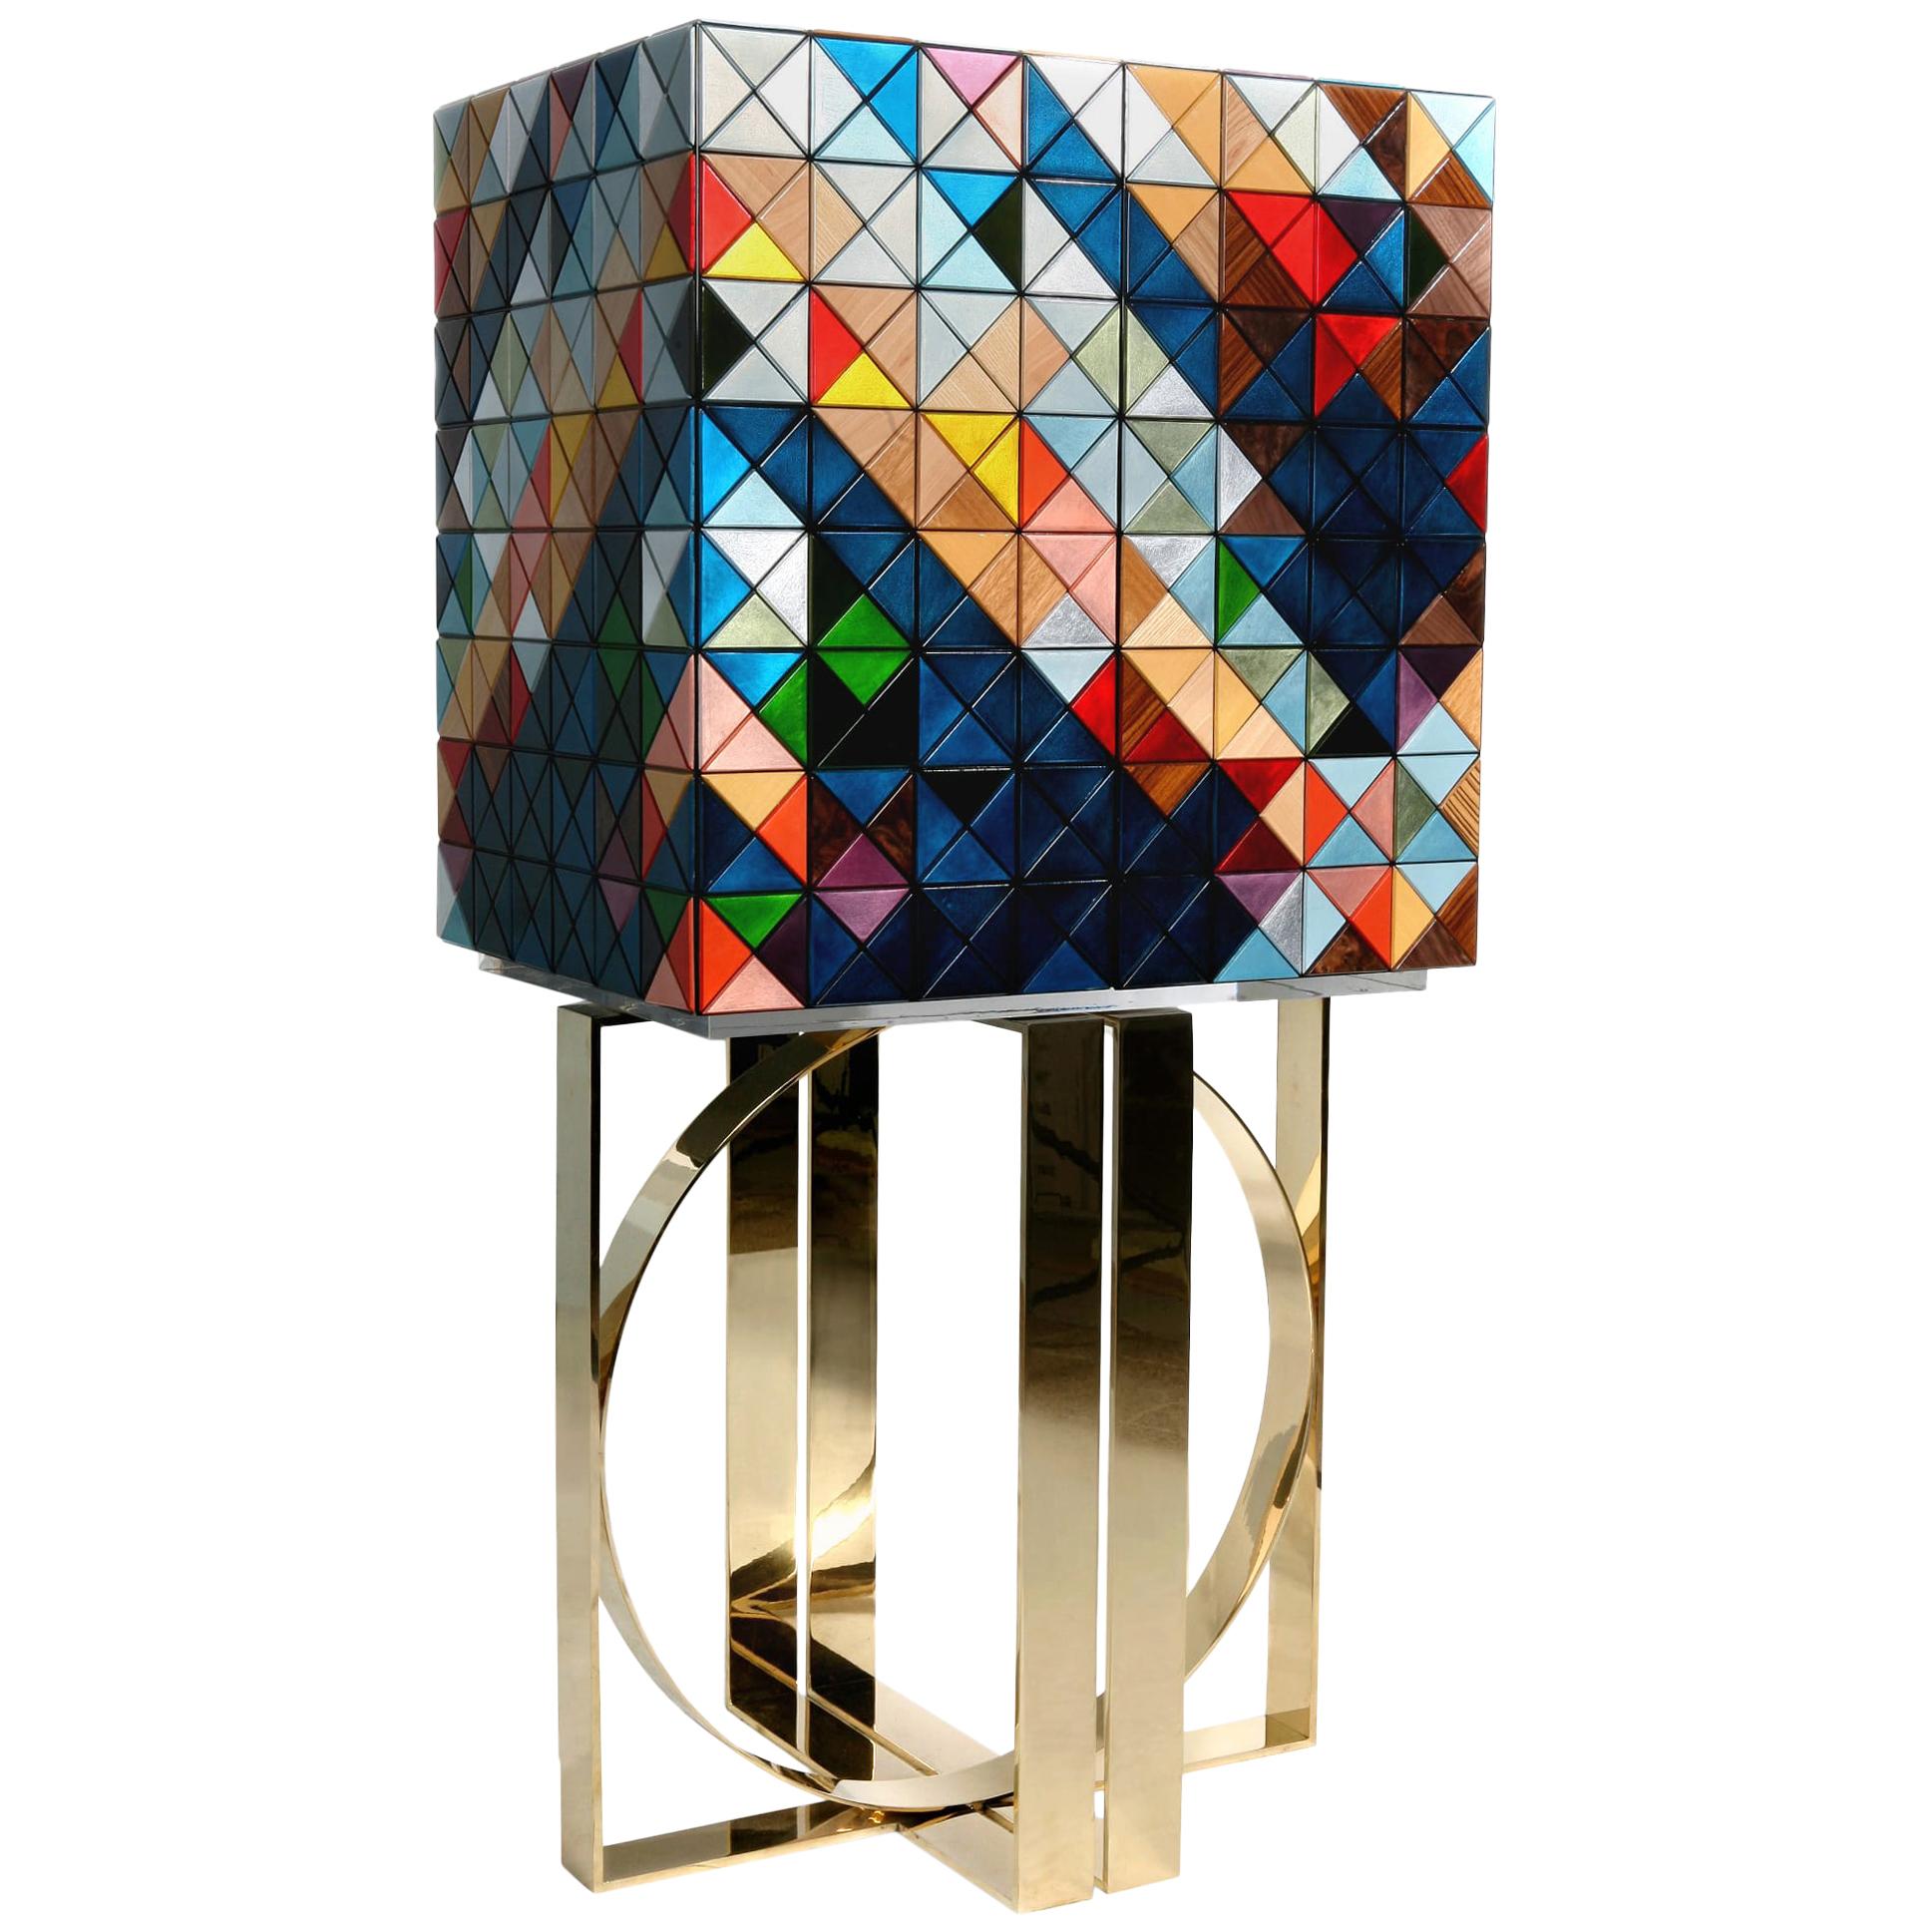 Iconic and unparalleled, the Pixel Cabinet presents a ground-breaking work of pioneering design. This piece carries the dedication and art of those who built it, a variety of traditional production techniques to craft an avant-garde furniture piece